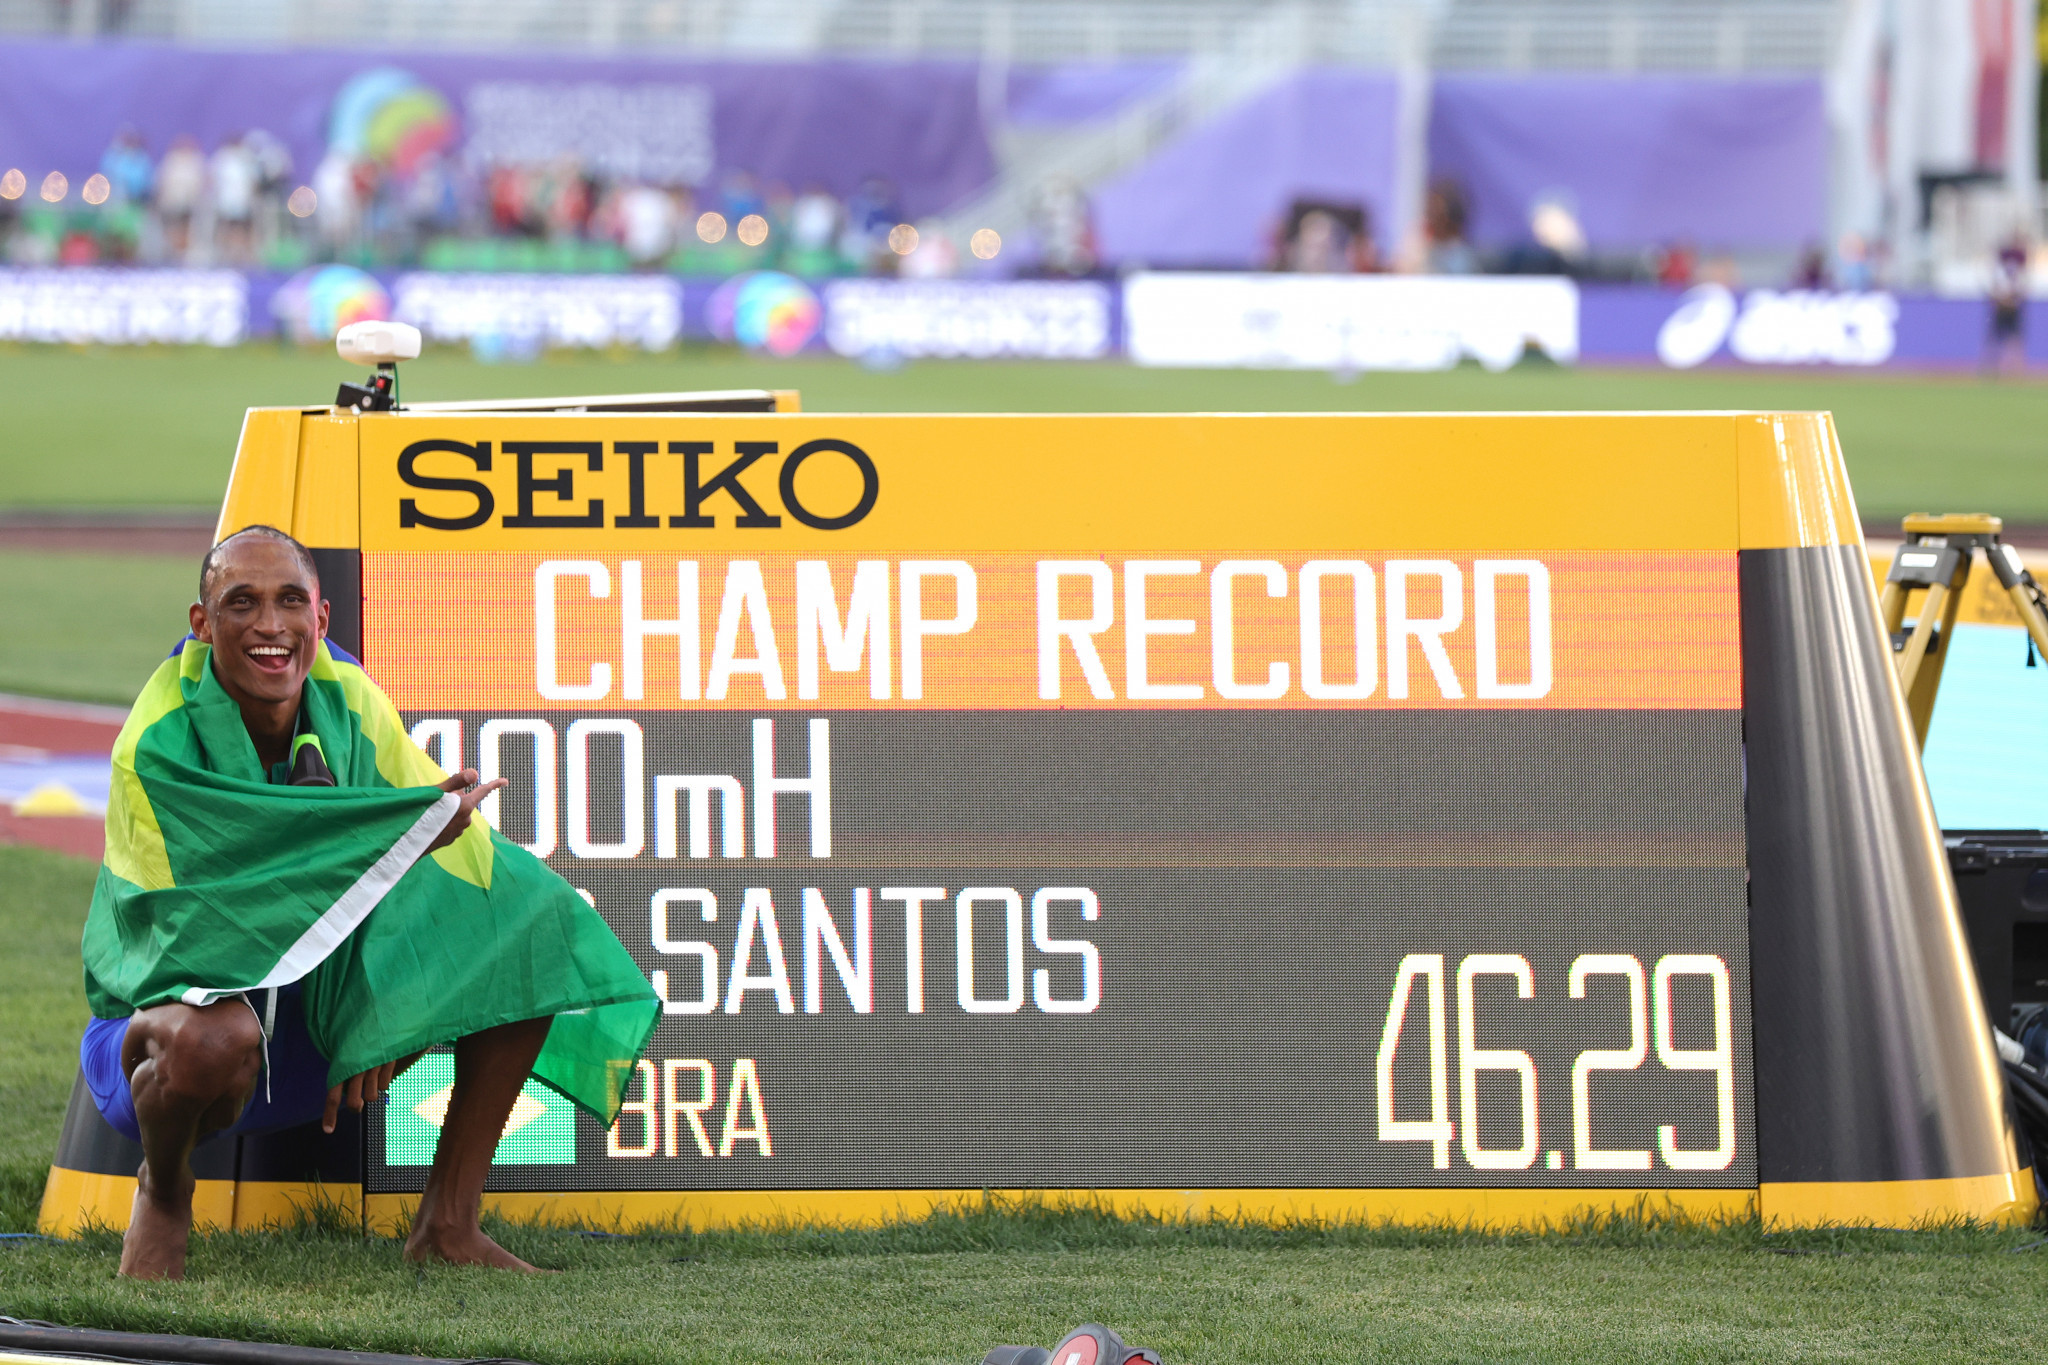 Alison dos Santos celebrating his Championship record ©Getty Images